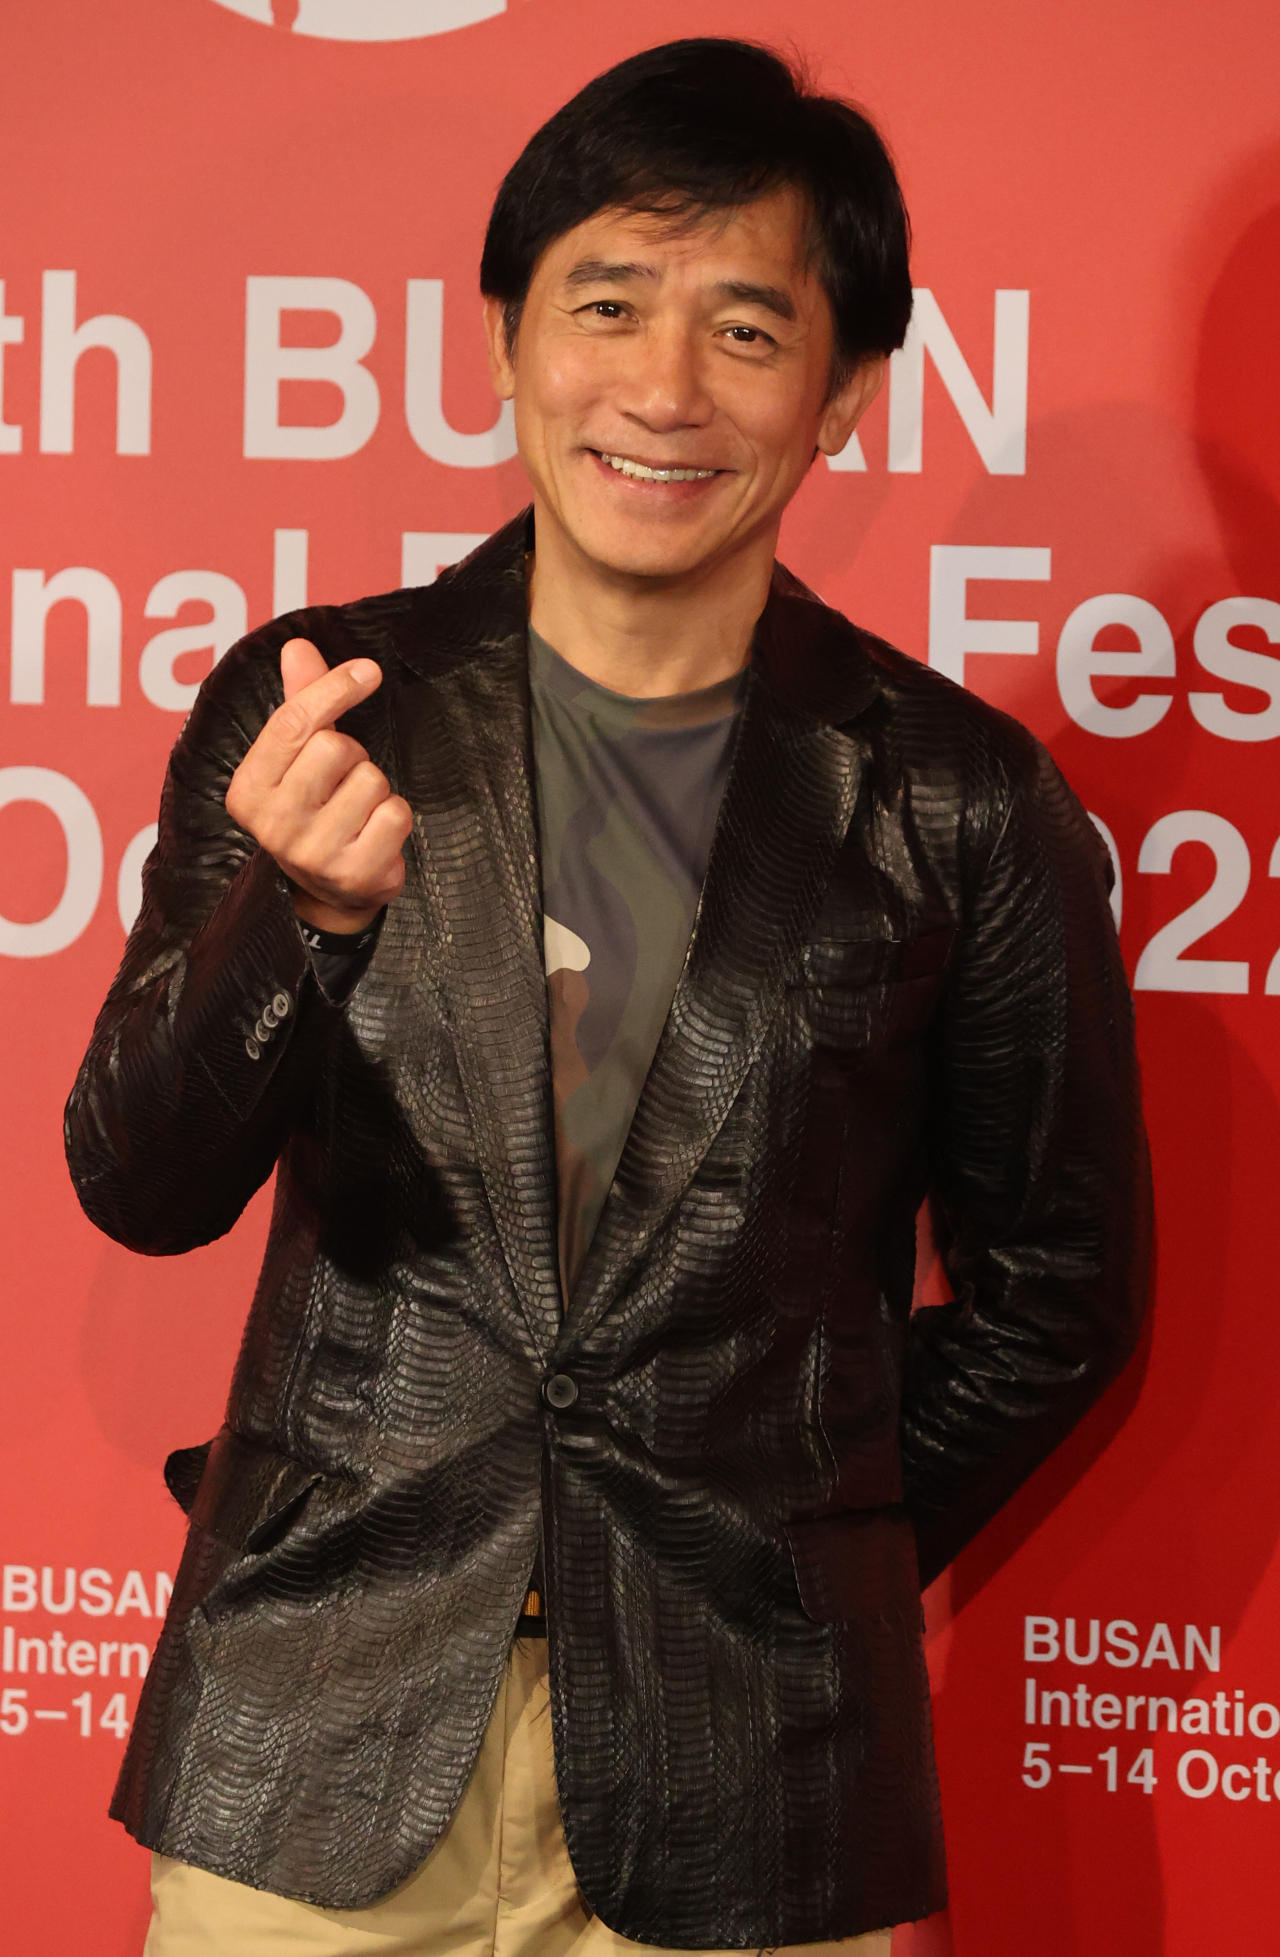 Hong Kong movie star Tony Leung poses for photos after a press conference held at the KNN theater in Busan, Thursday. (Yonhap)